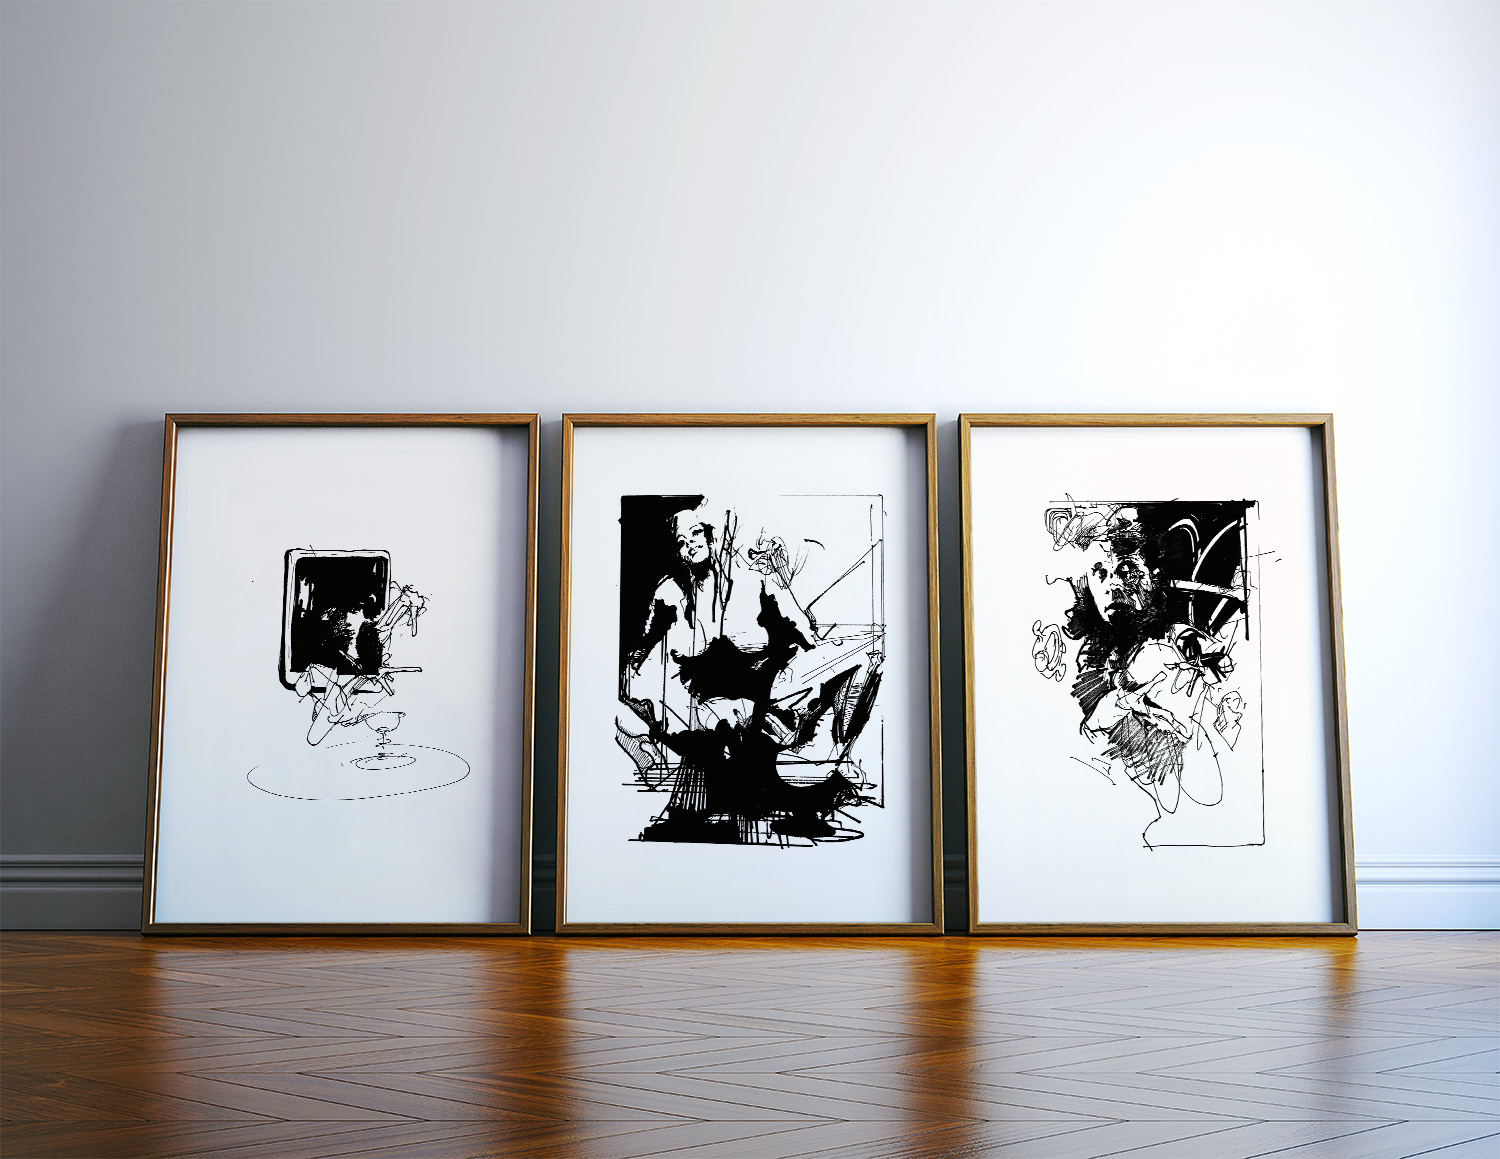 posters-prints, giclee-print, abstract, expressive, monochrome, patterns, people, black, white, ink, paper, black-and-white, contemporary-art, danish, decorative, design, expressionism, faces, interior, interior-design, modern, modern-art, nordic, posters, prints, scandinavien, Buy original high quality art. Paintings, drawings, limited edition prints & posters by talented artists.